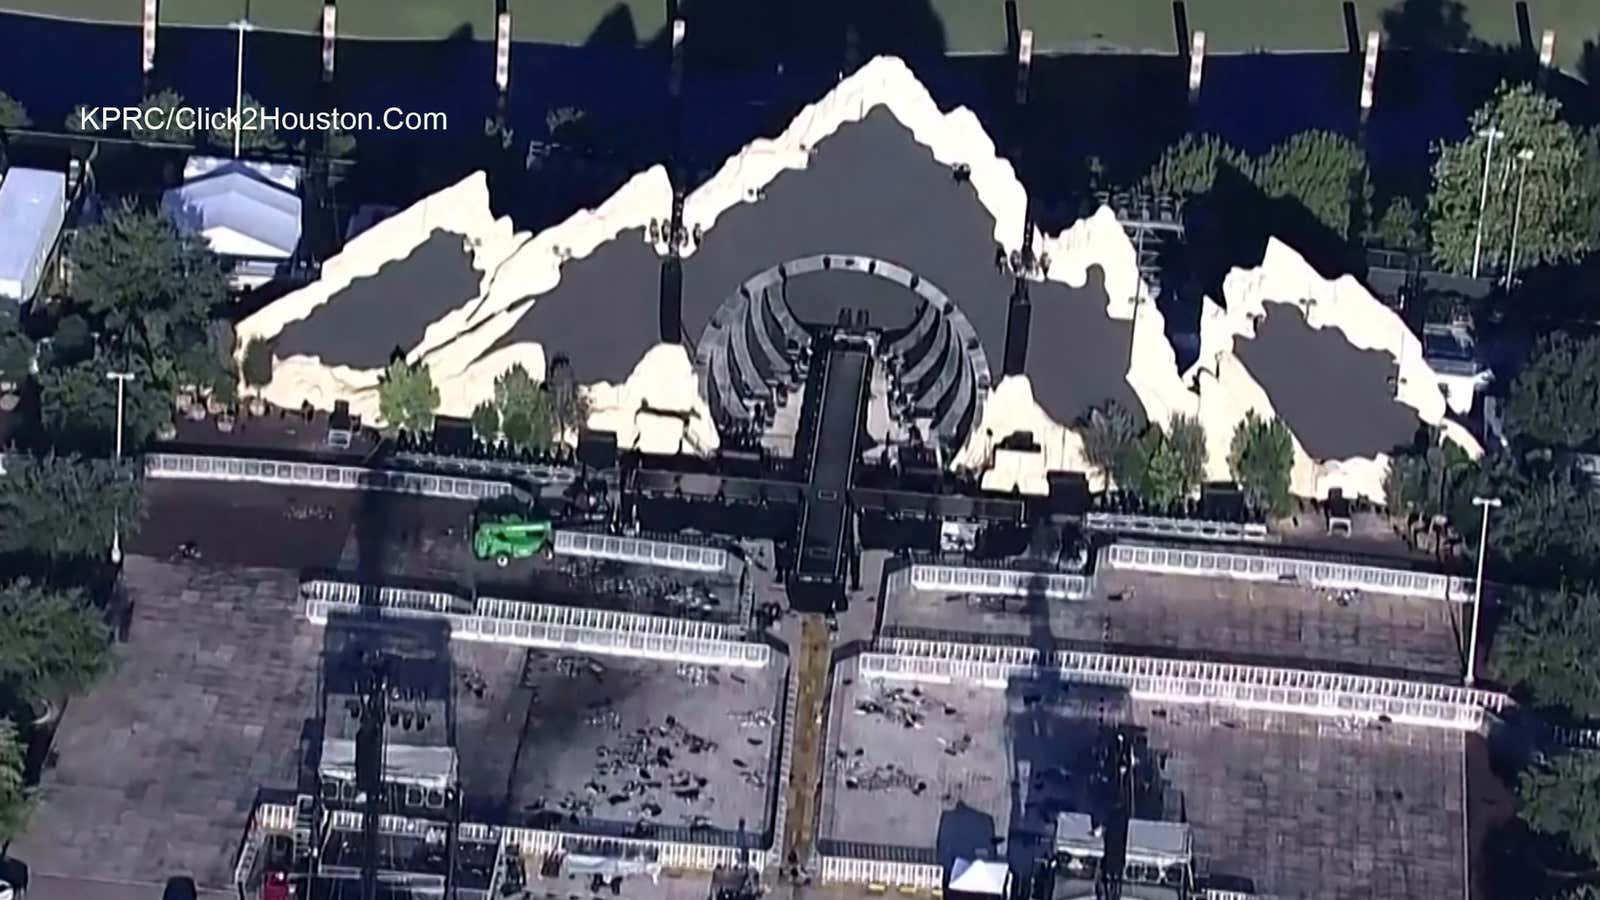 The Astroworld concert venue the morning after the event.